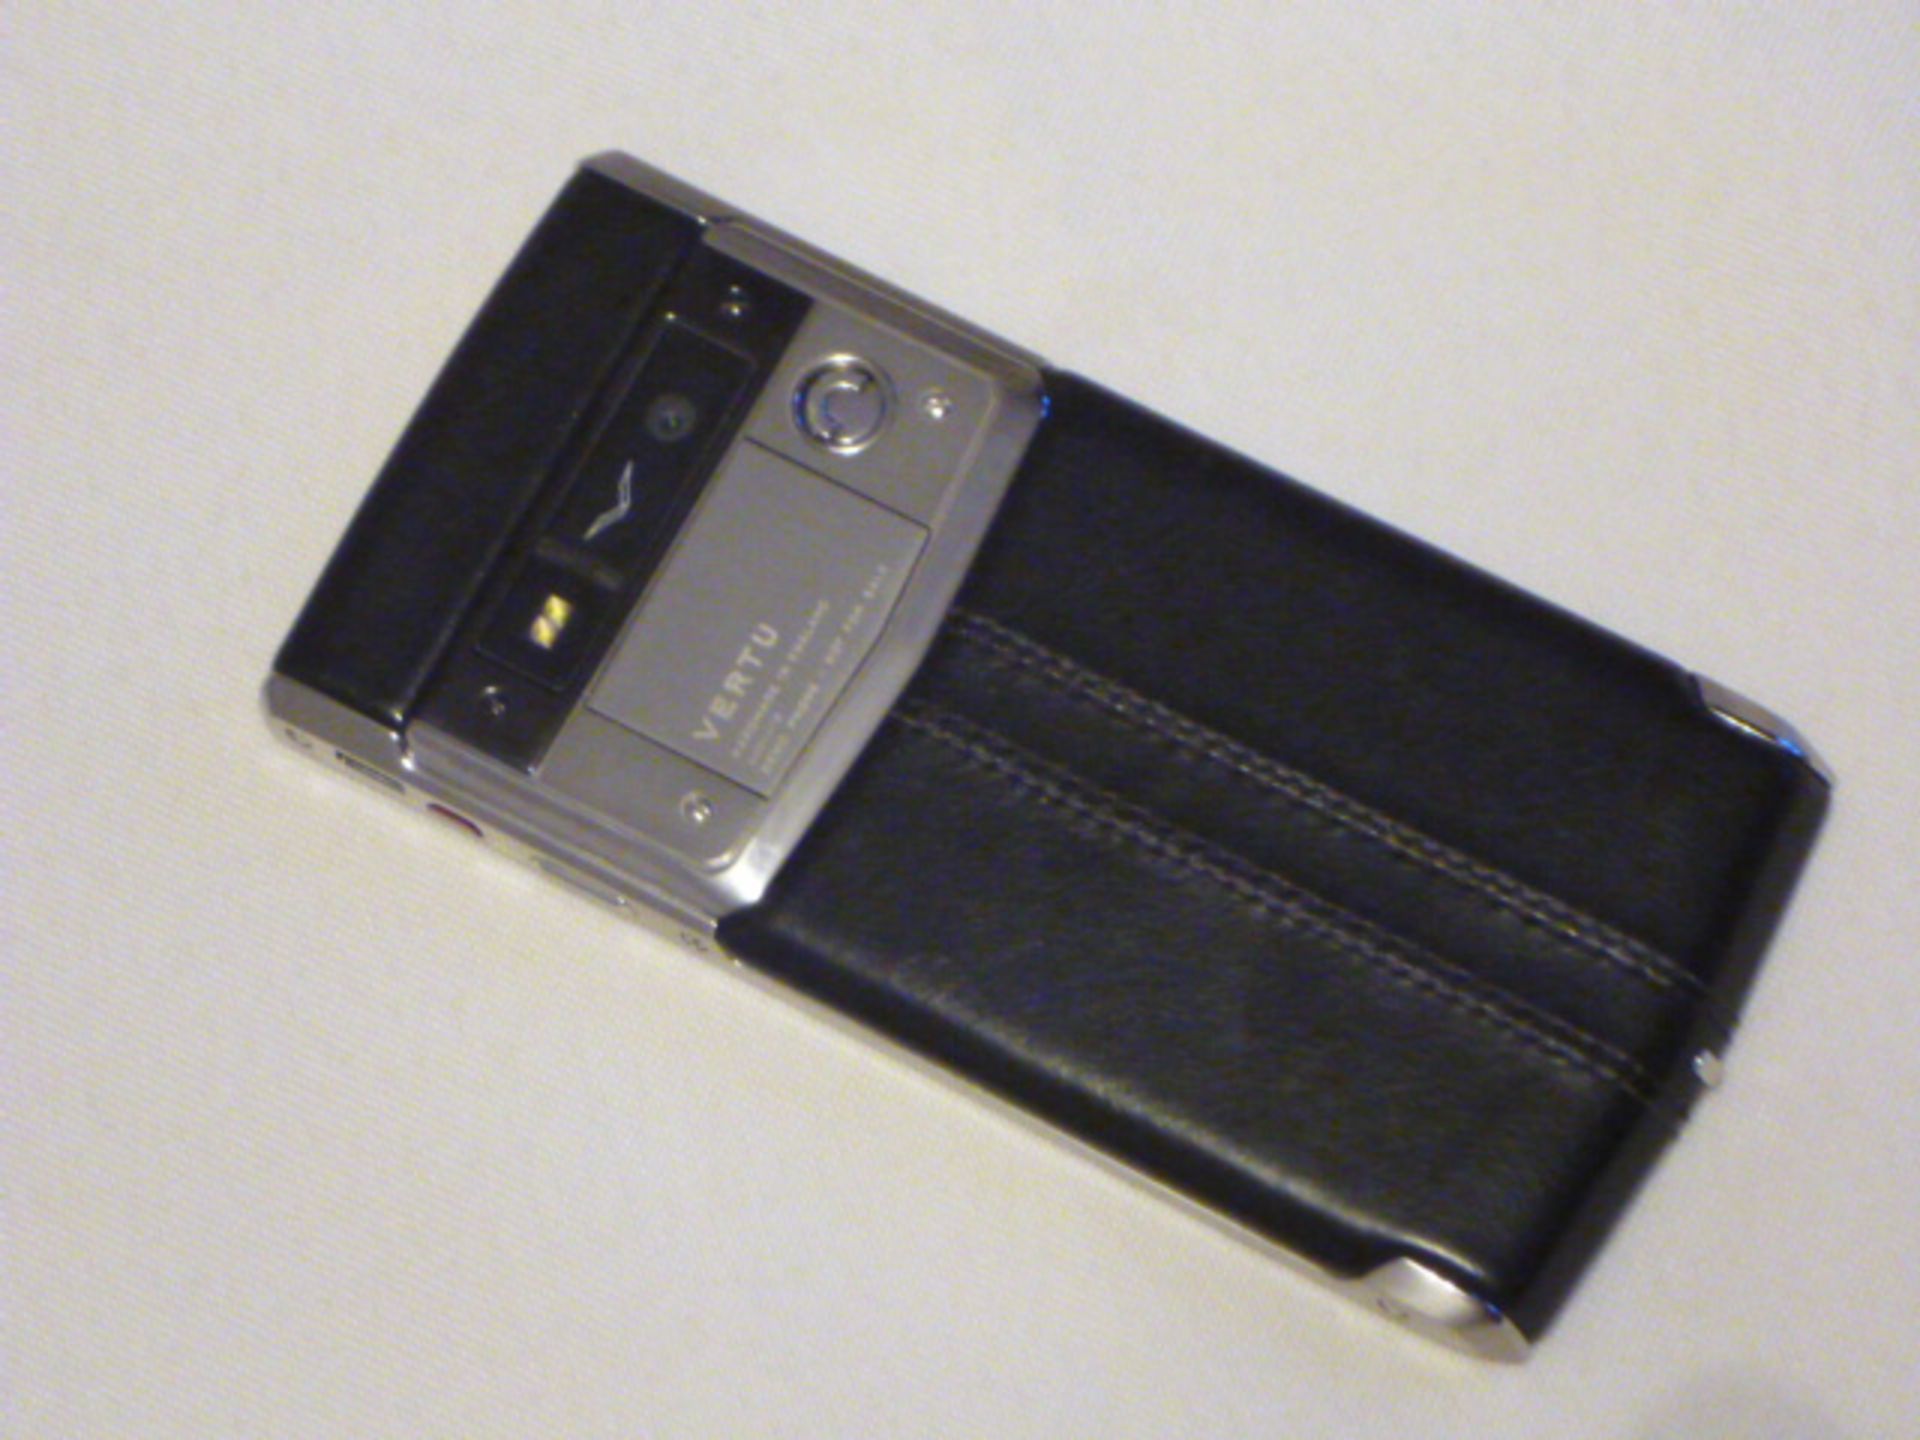 Vertu Signature Touch, Jet Calf. Demonstrator, S/N E-001276 Tested Working, but without Warranty - Image 2 of 2